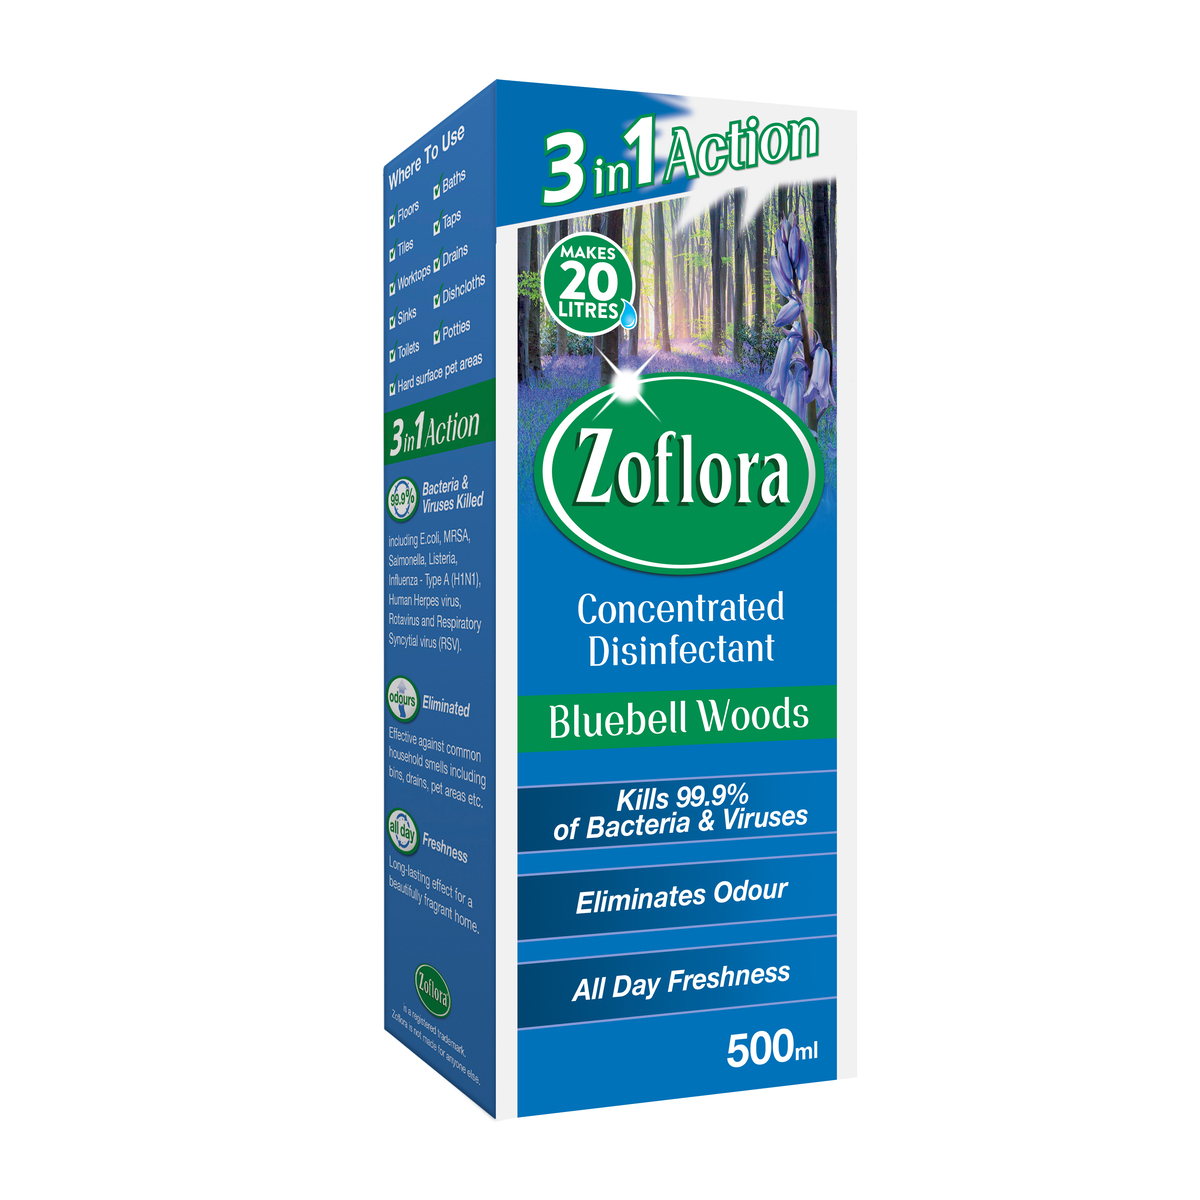 Zoflora Bluebell Woods 3in1 Action Concentrated Disinfectant 500ml